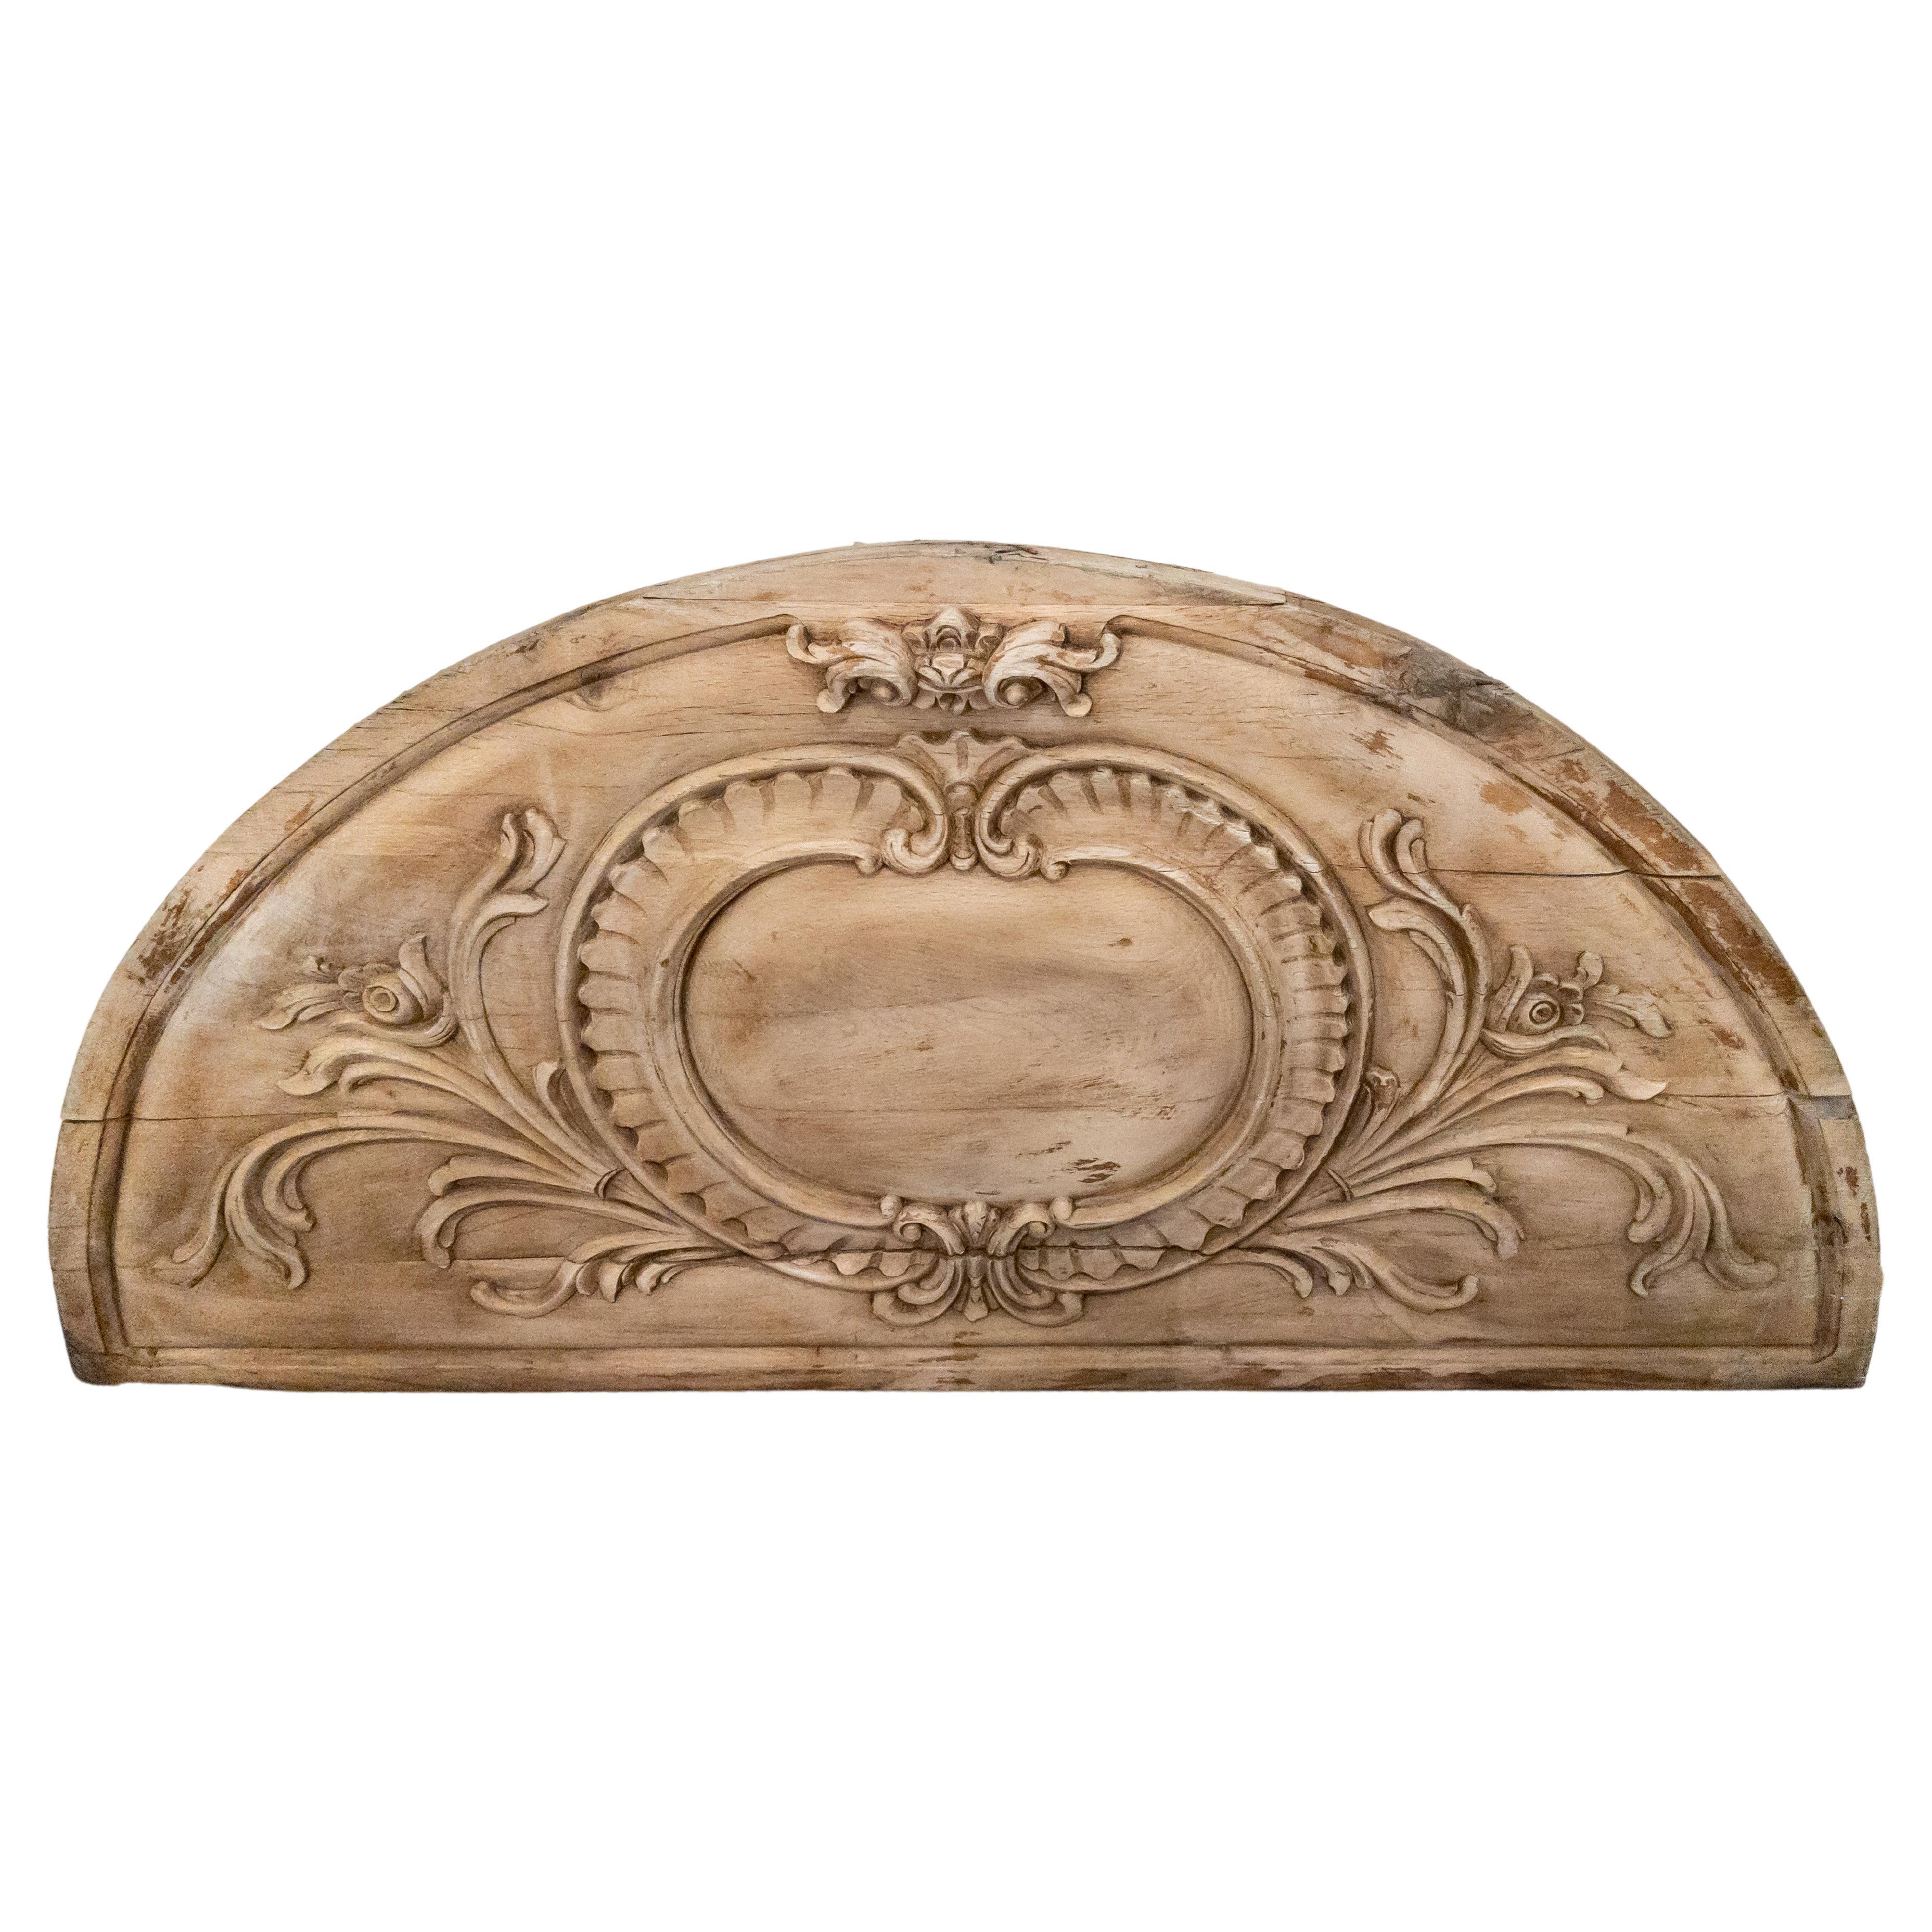 Monumental Arched Wood Architectural Fragment with Carvings from France For Sale